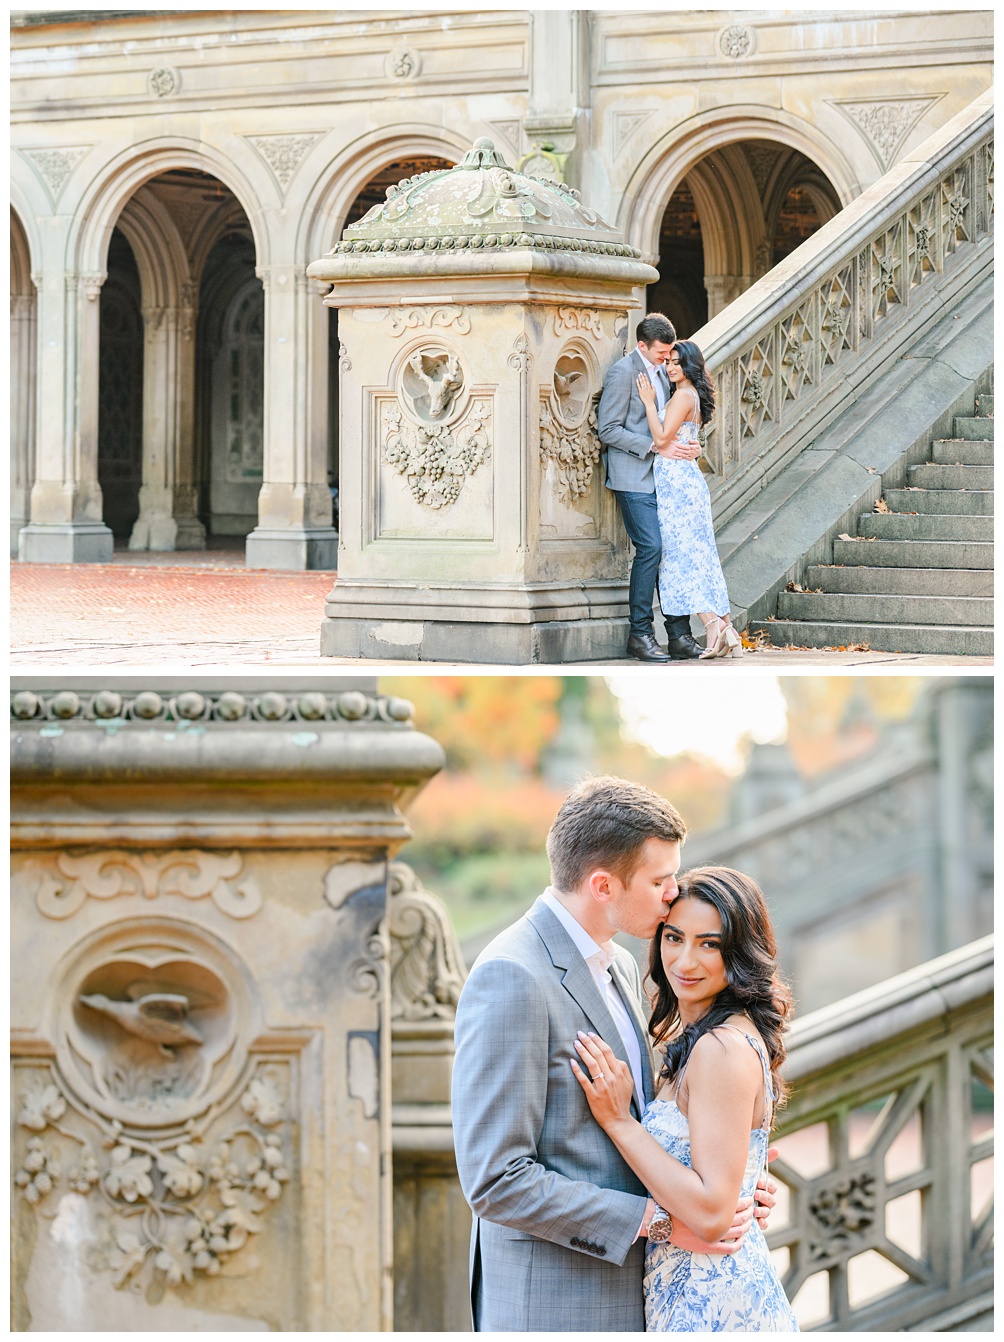 Bethesda Terrace Engagement Photos in NYC